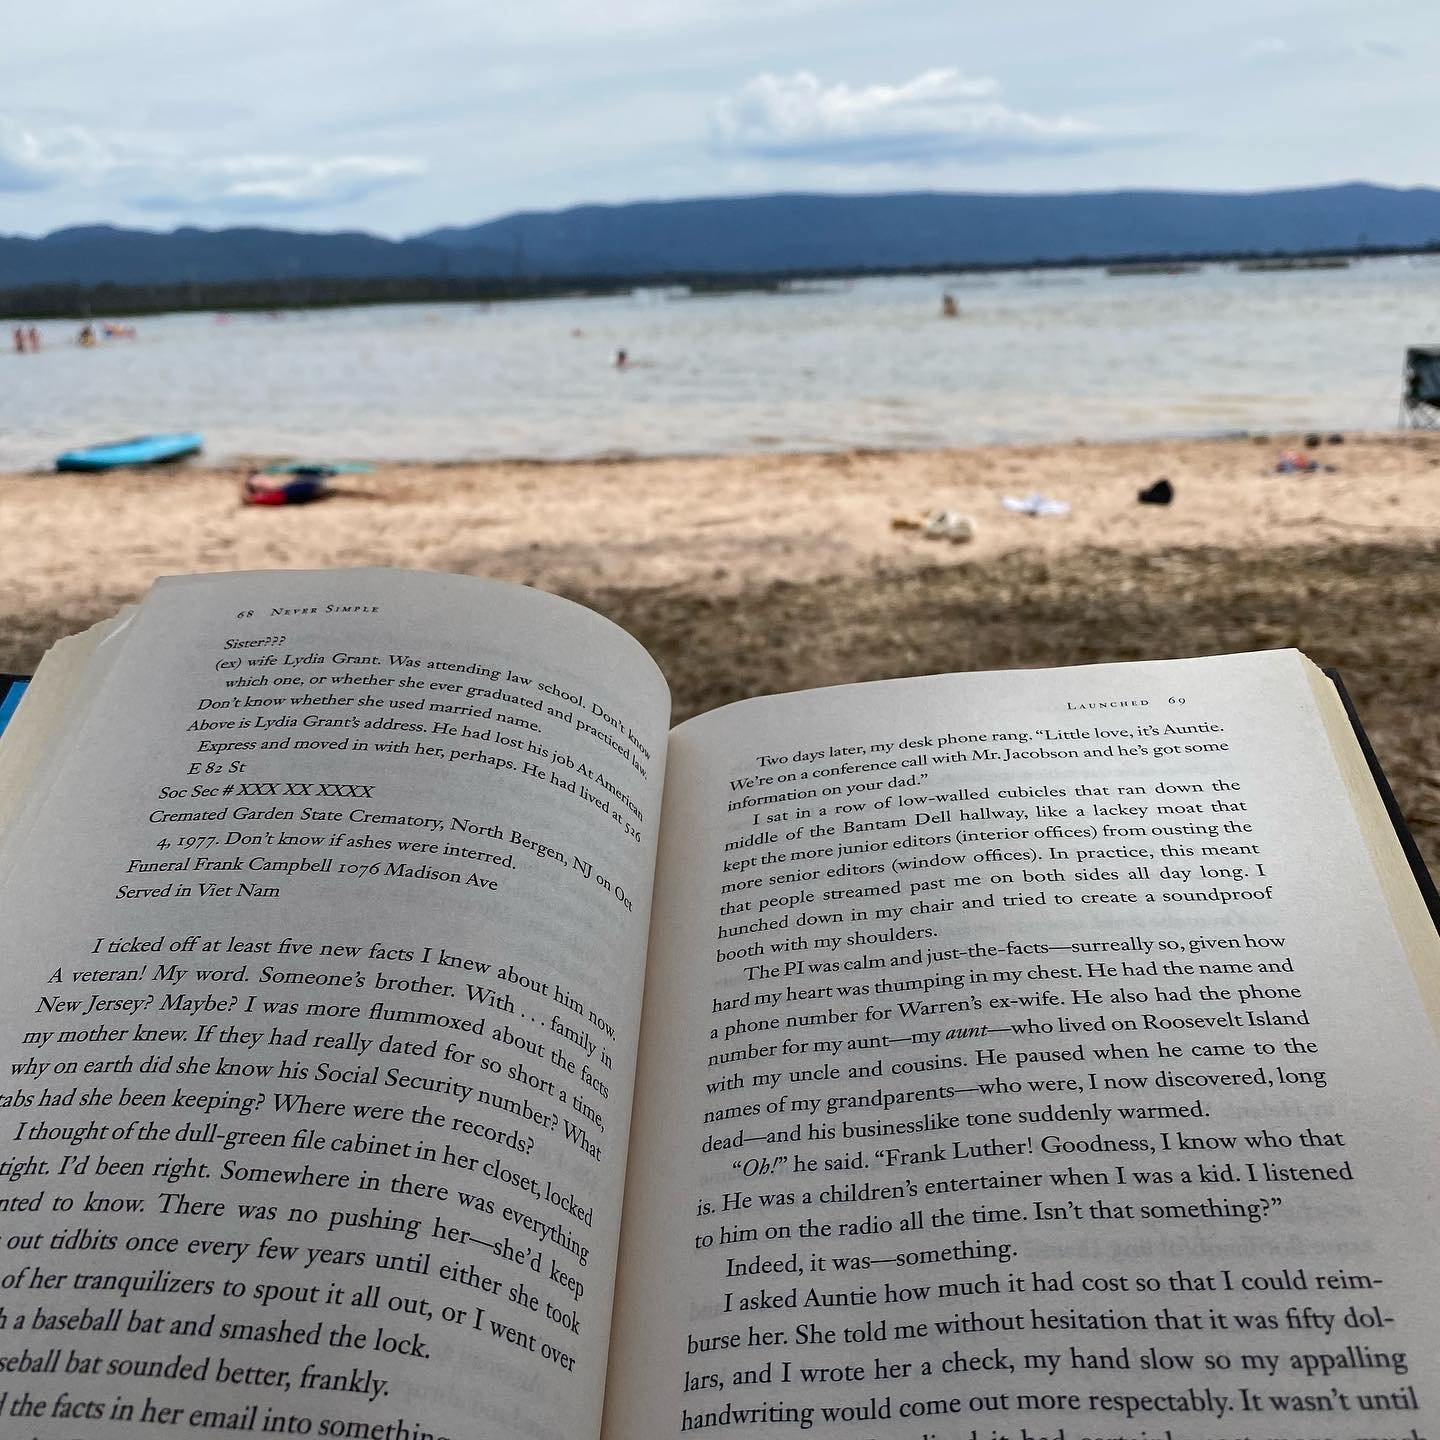 For me, there is something about reading in January that feels so luxurious. The time, the mixture of swimming and reading and no need to rush off anywhere. It is such a wonderful bookend to a crazy December. 

I&rsquo;m onto my next book superquick 